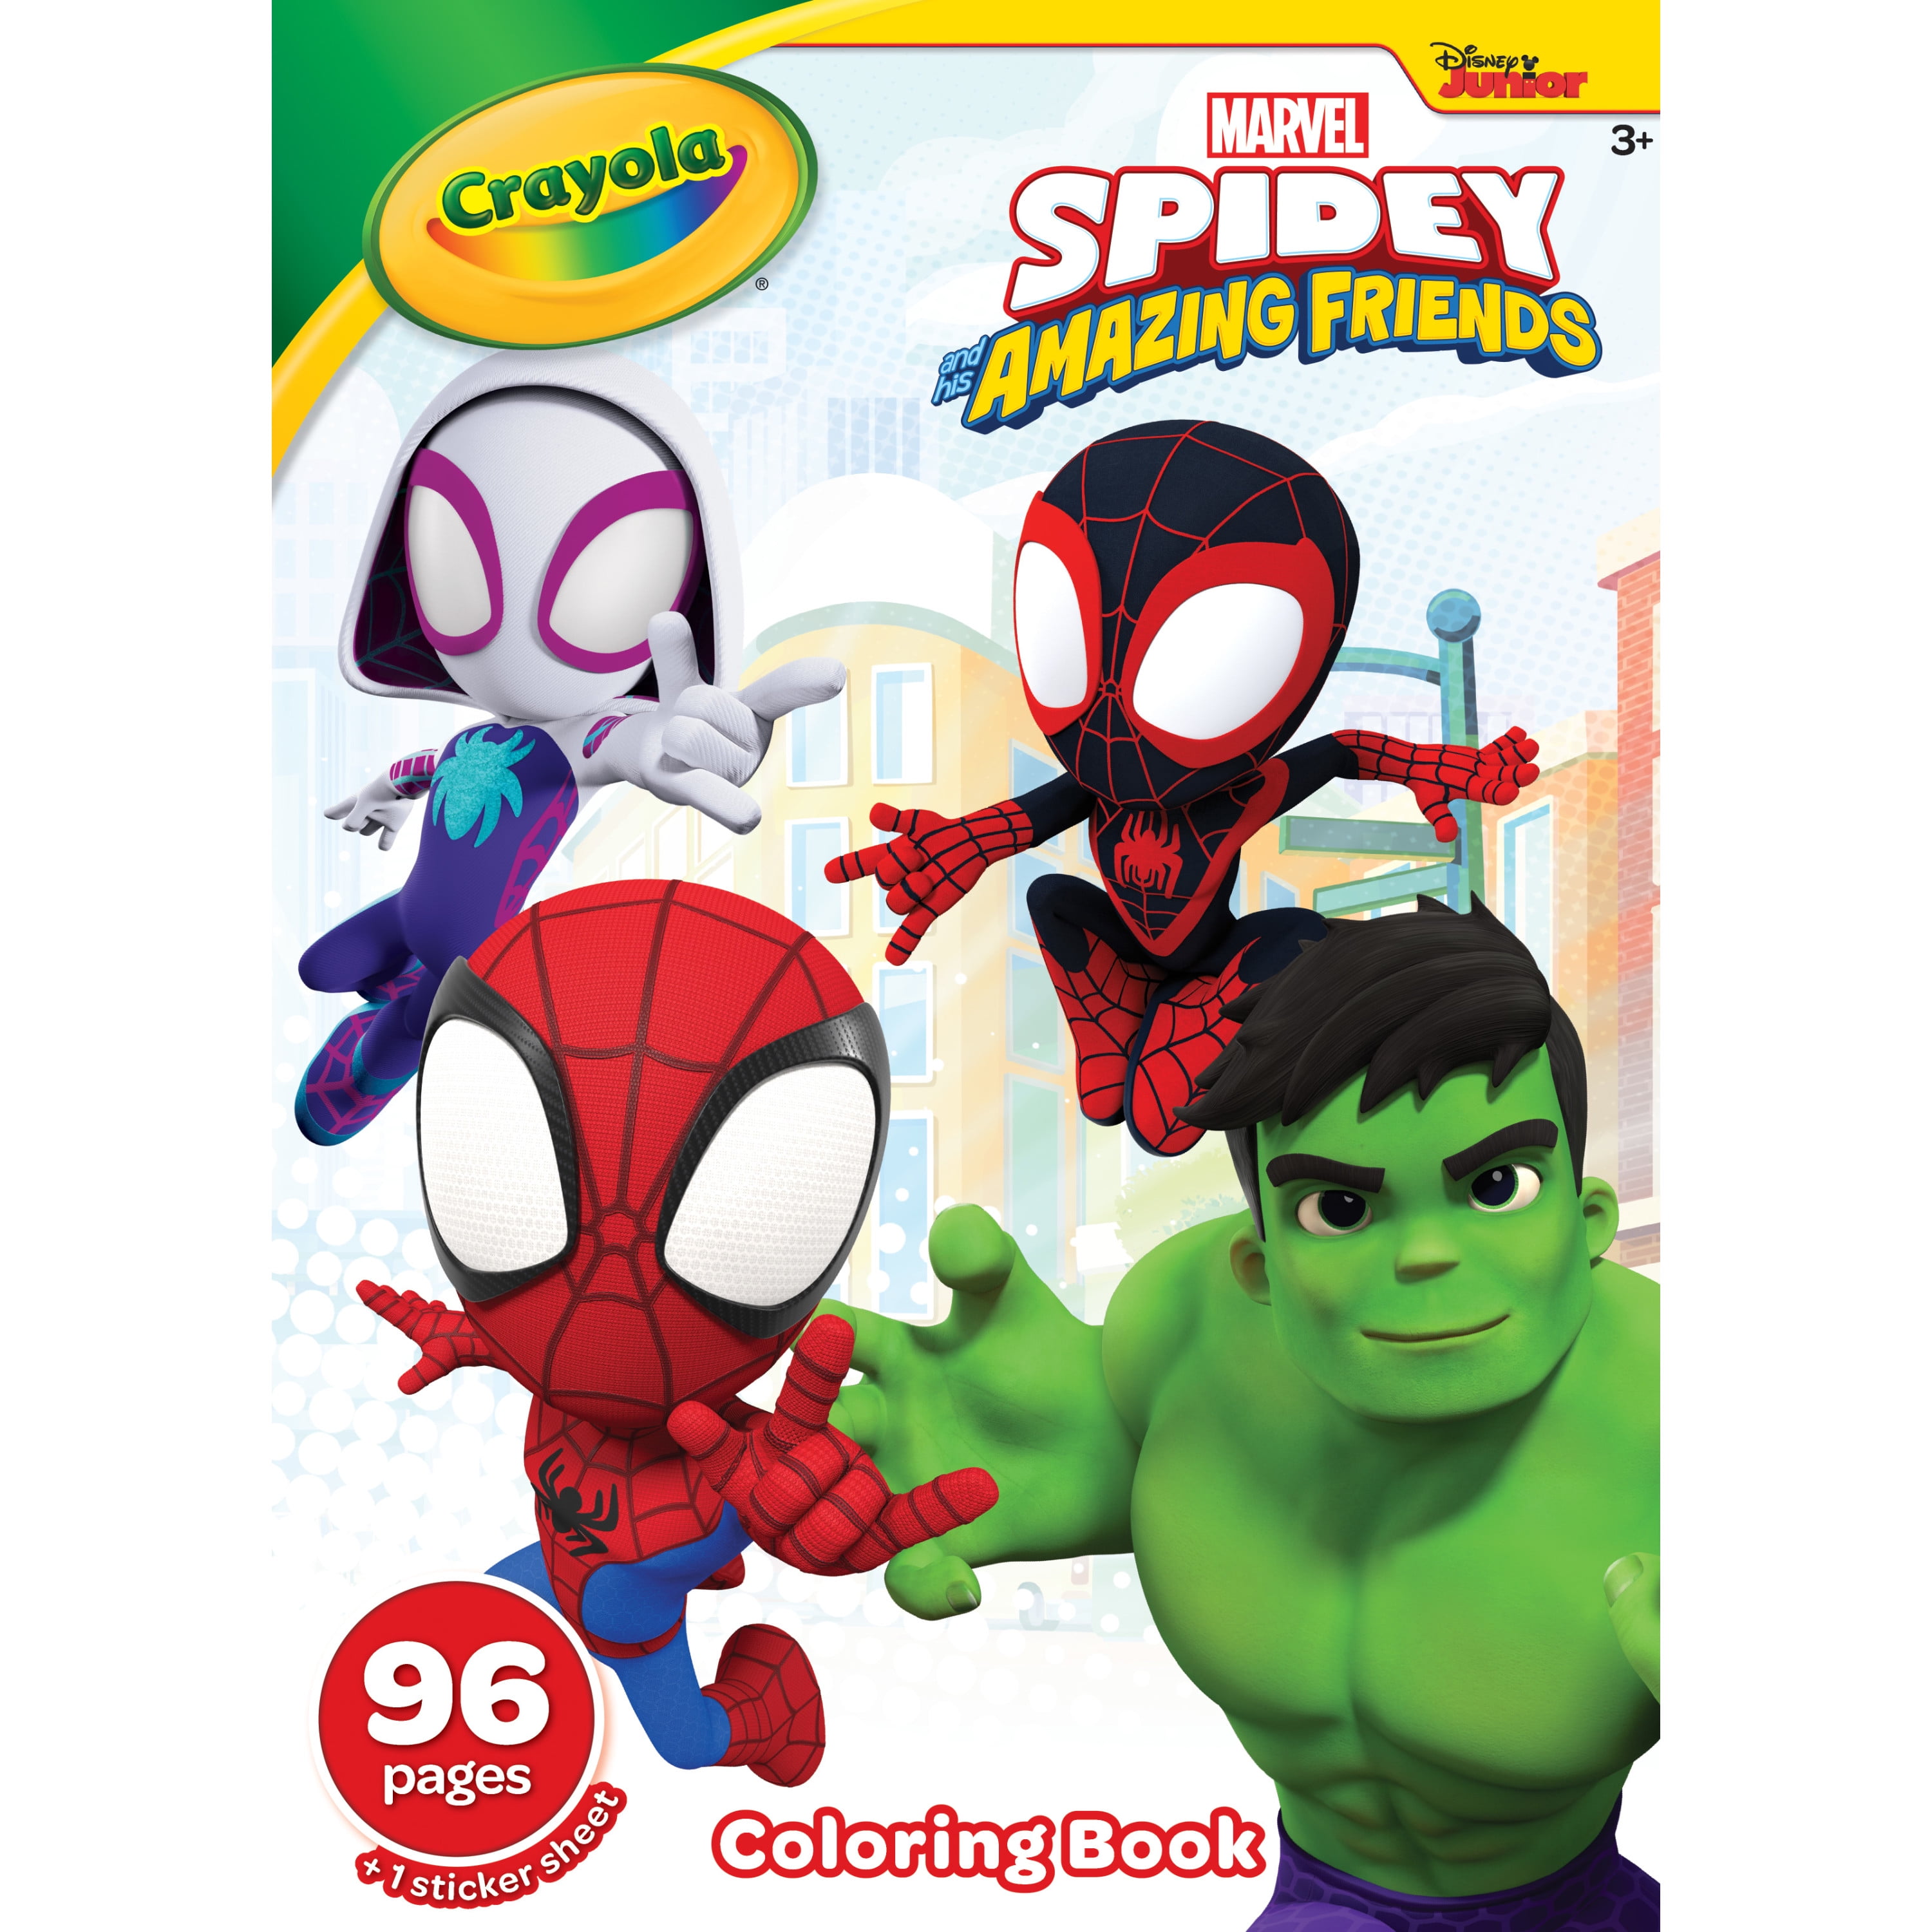 Bendon Intl Disney Favorite Characters Coloring Books for Kids with Stickers (Spiderman)